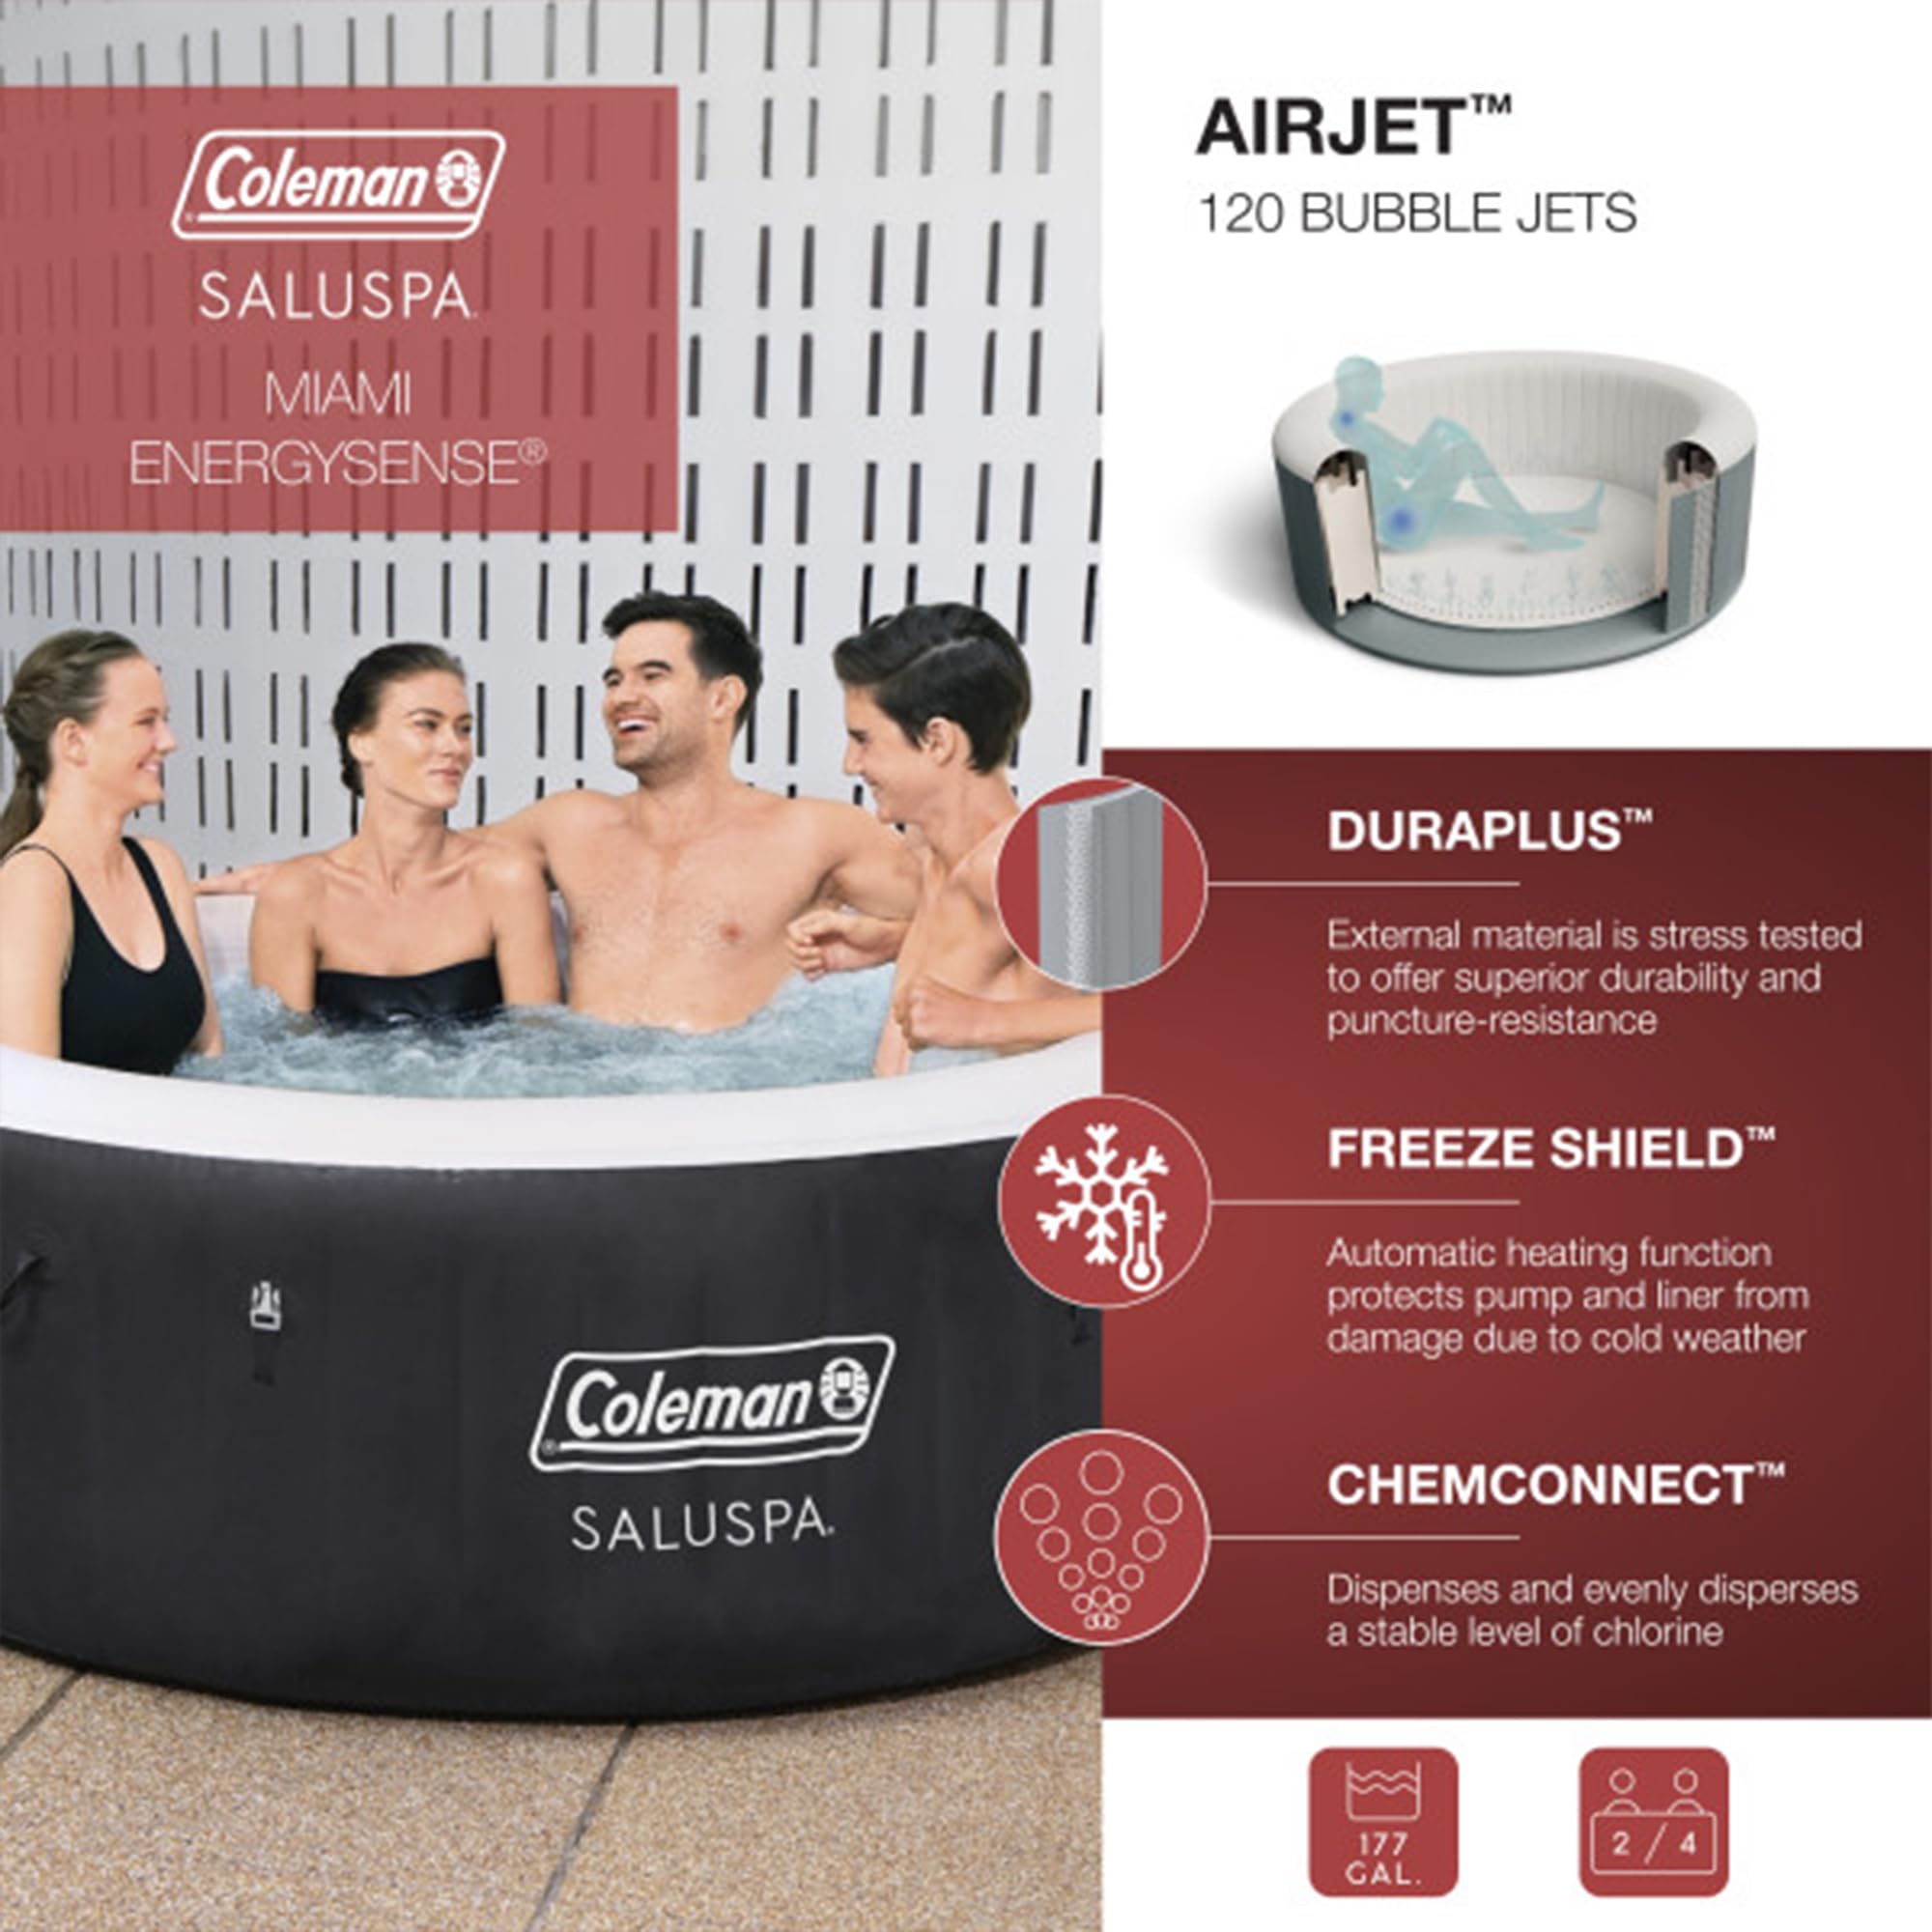 Bestway Coleman Miami AirJet Inflatable Hot Tub with EnergySense Cover, 4-Pack of SaluSpa Spa Seat and 4 Sets of SaluSpa Padded Headrest Pillows